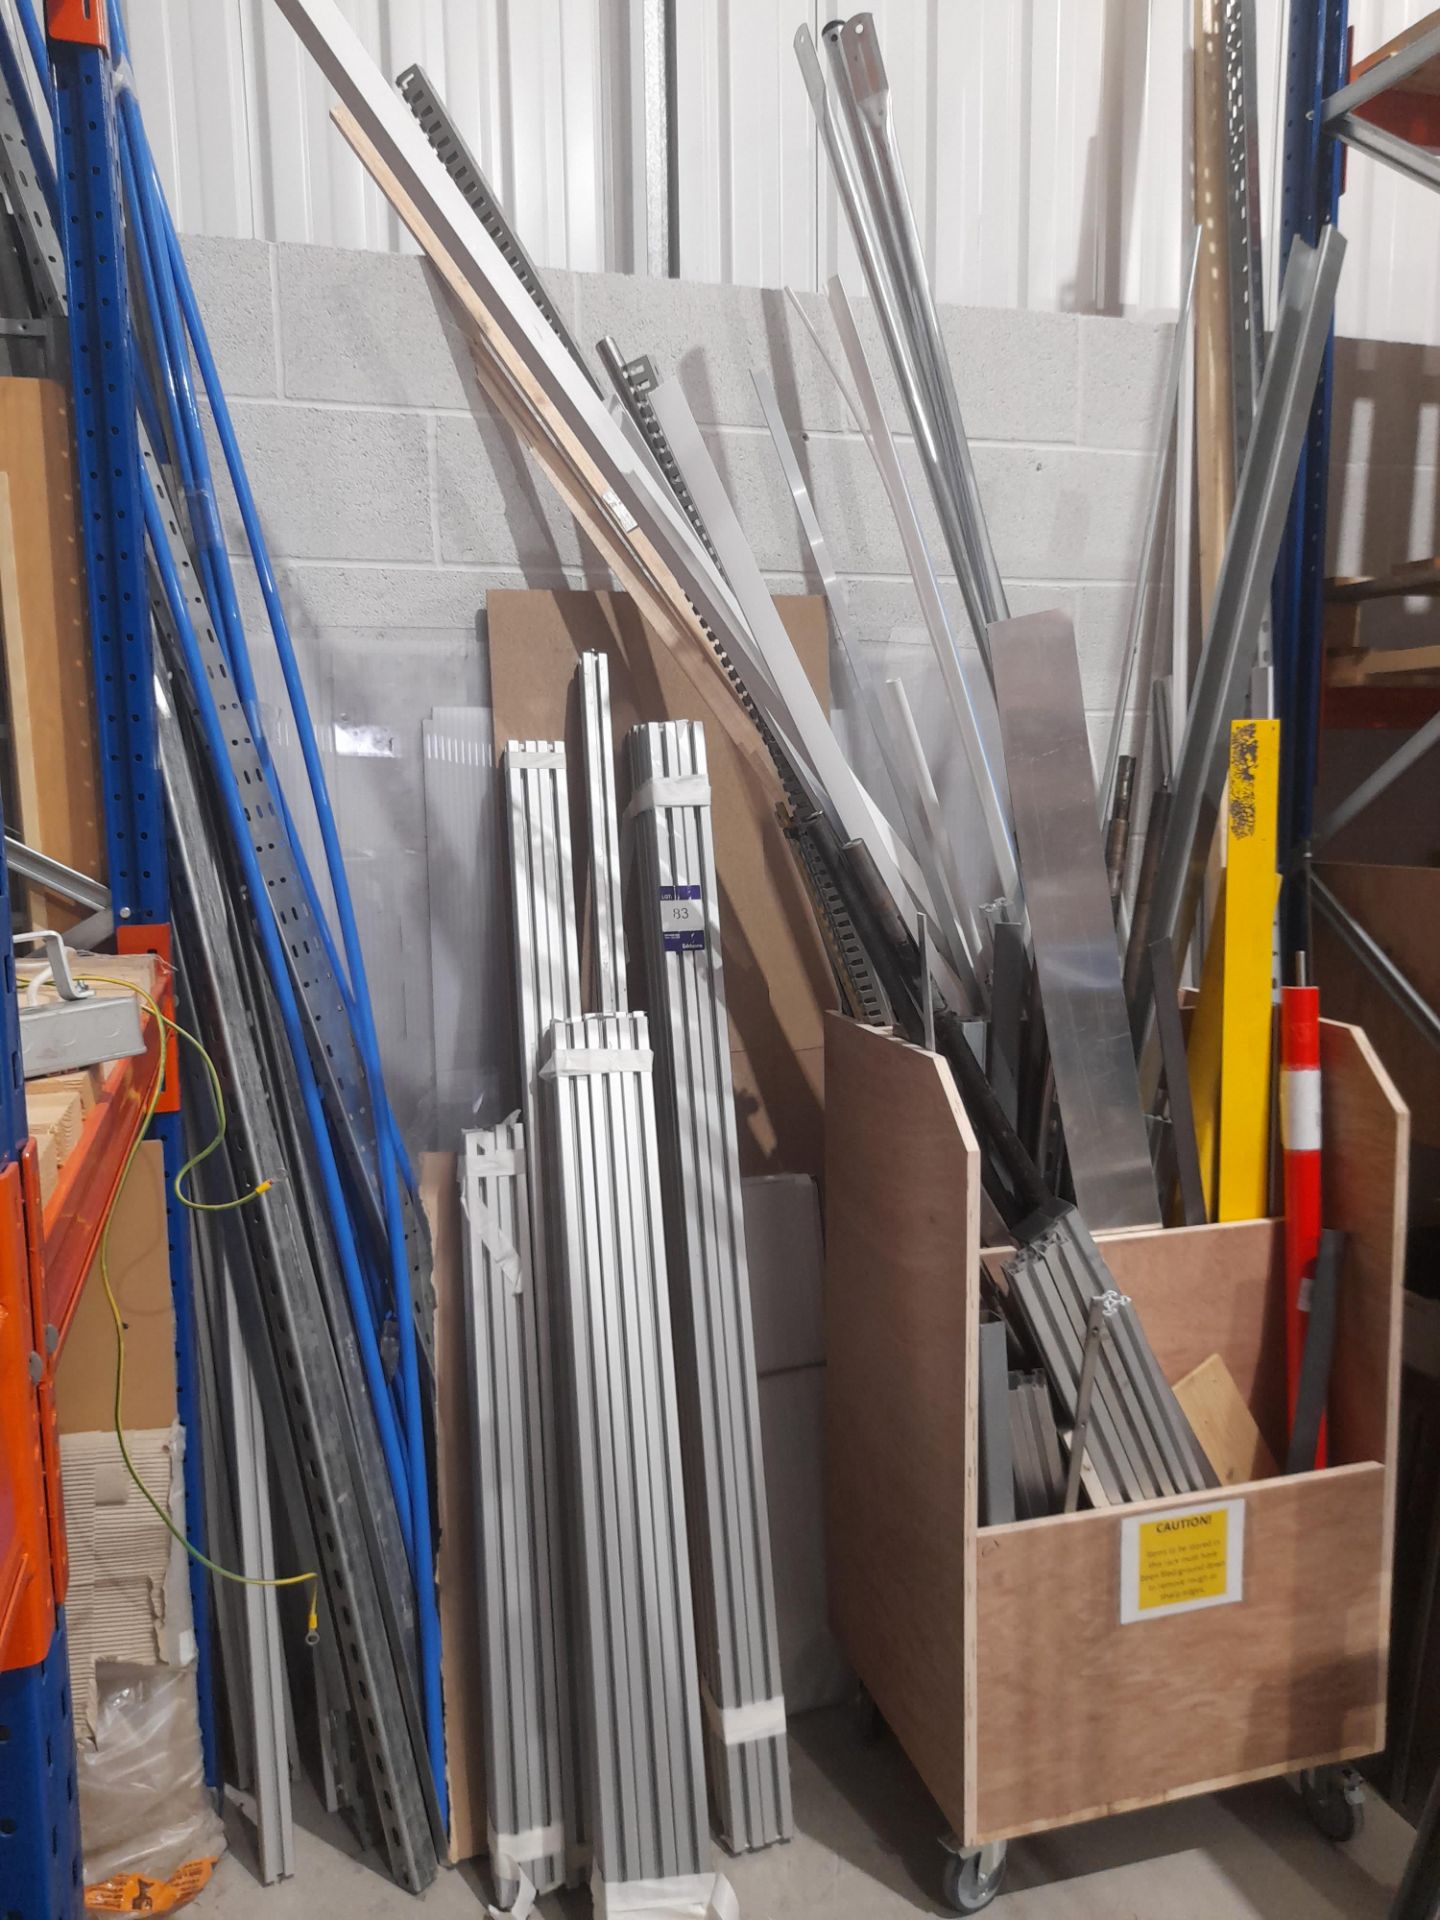 Quantity of various aluminium profiles, metal rods, threaded bar and plastic trunking to wall and - Image 2 of 4